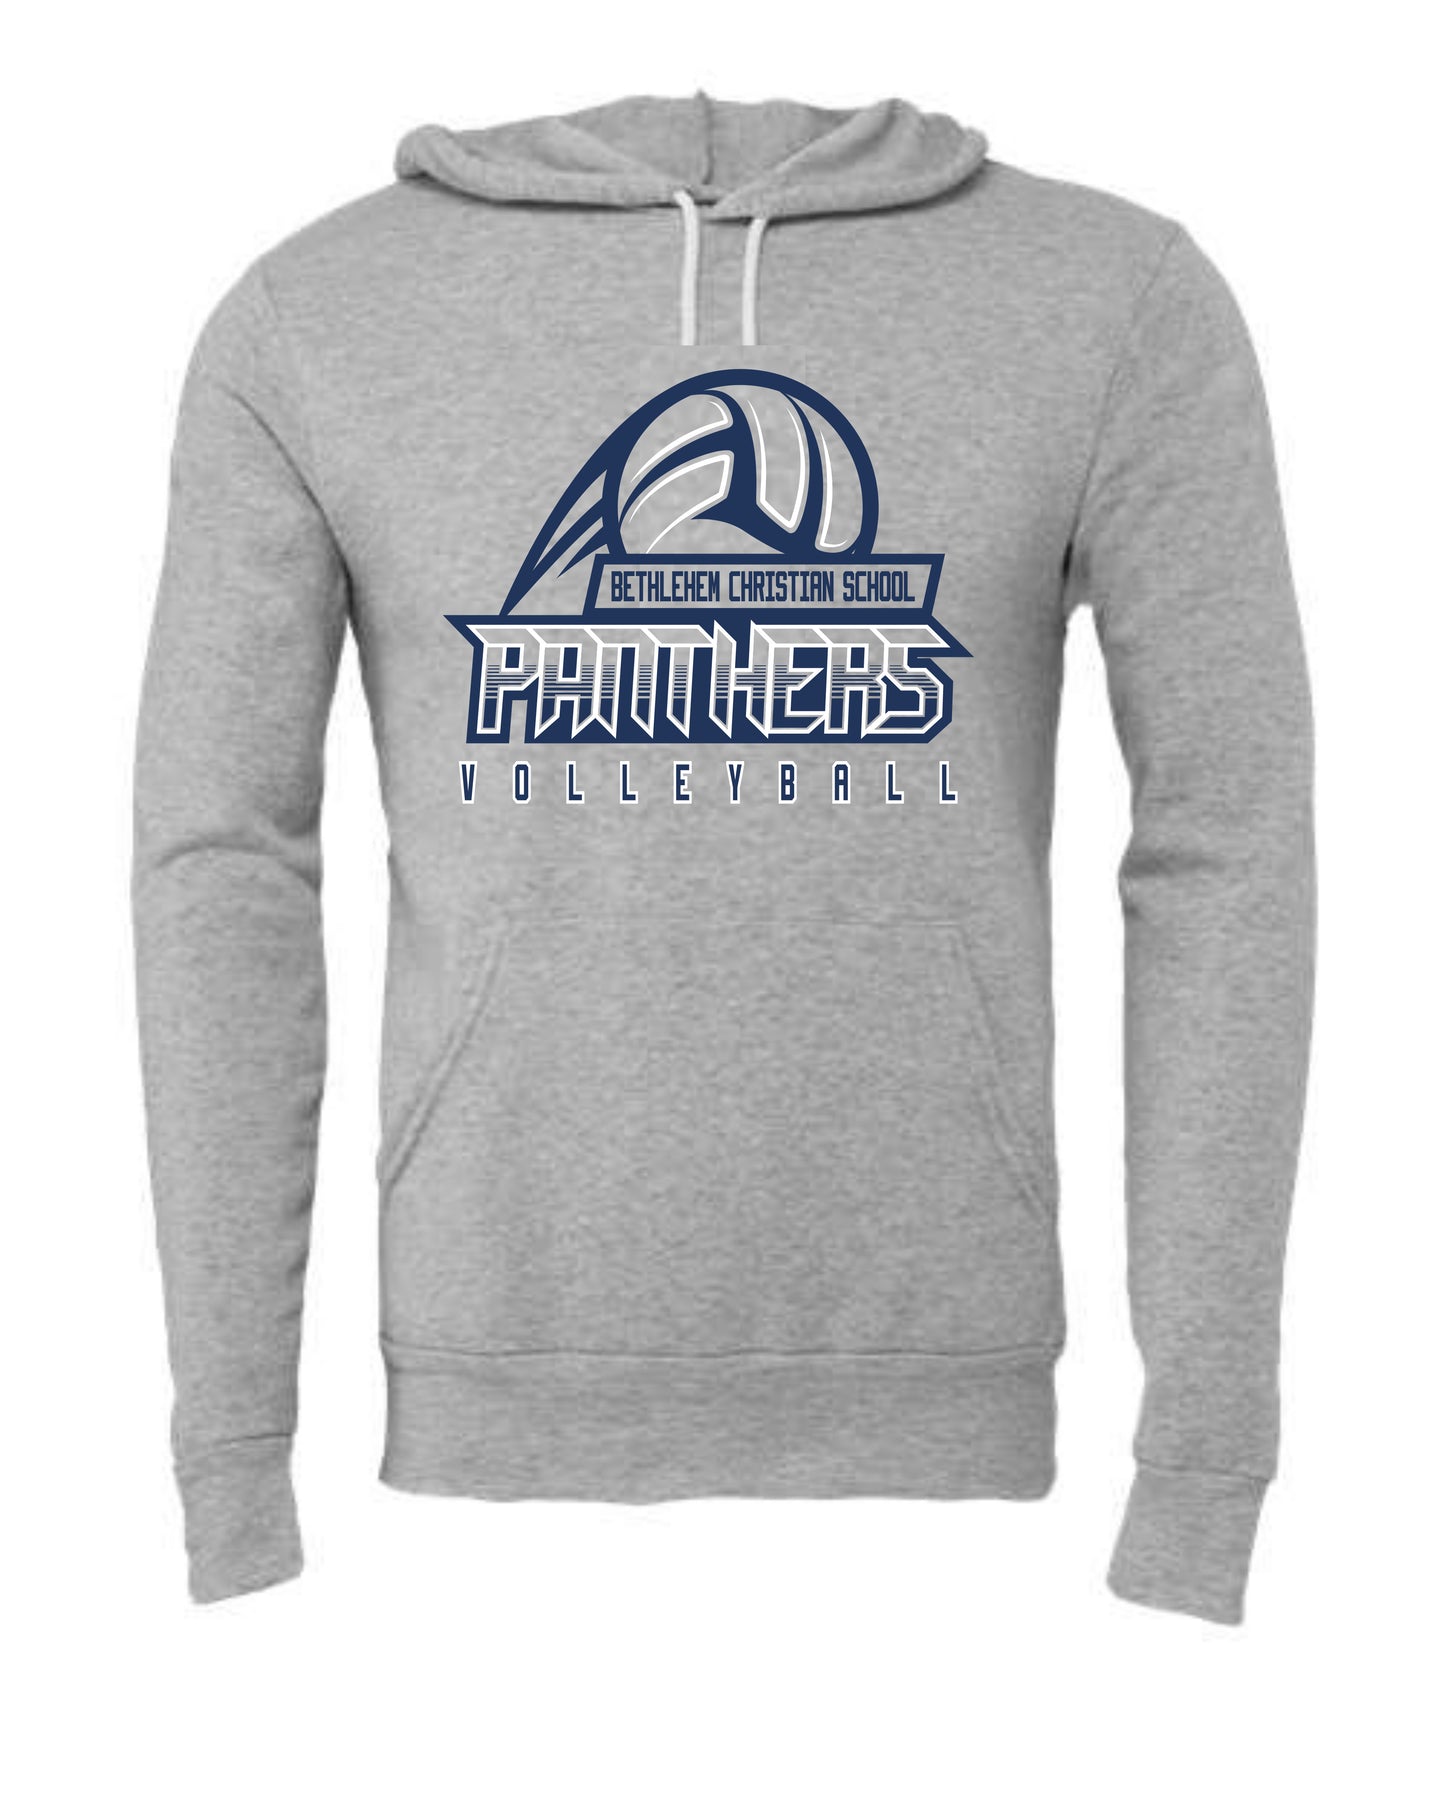 BCS Panthers Volleyball - Adult Hoodie